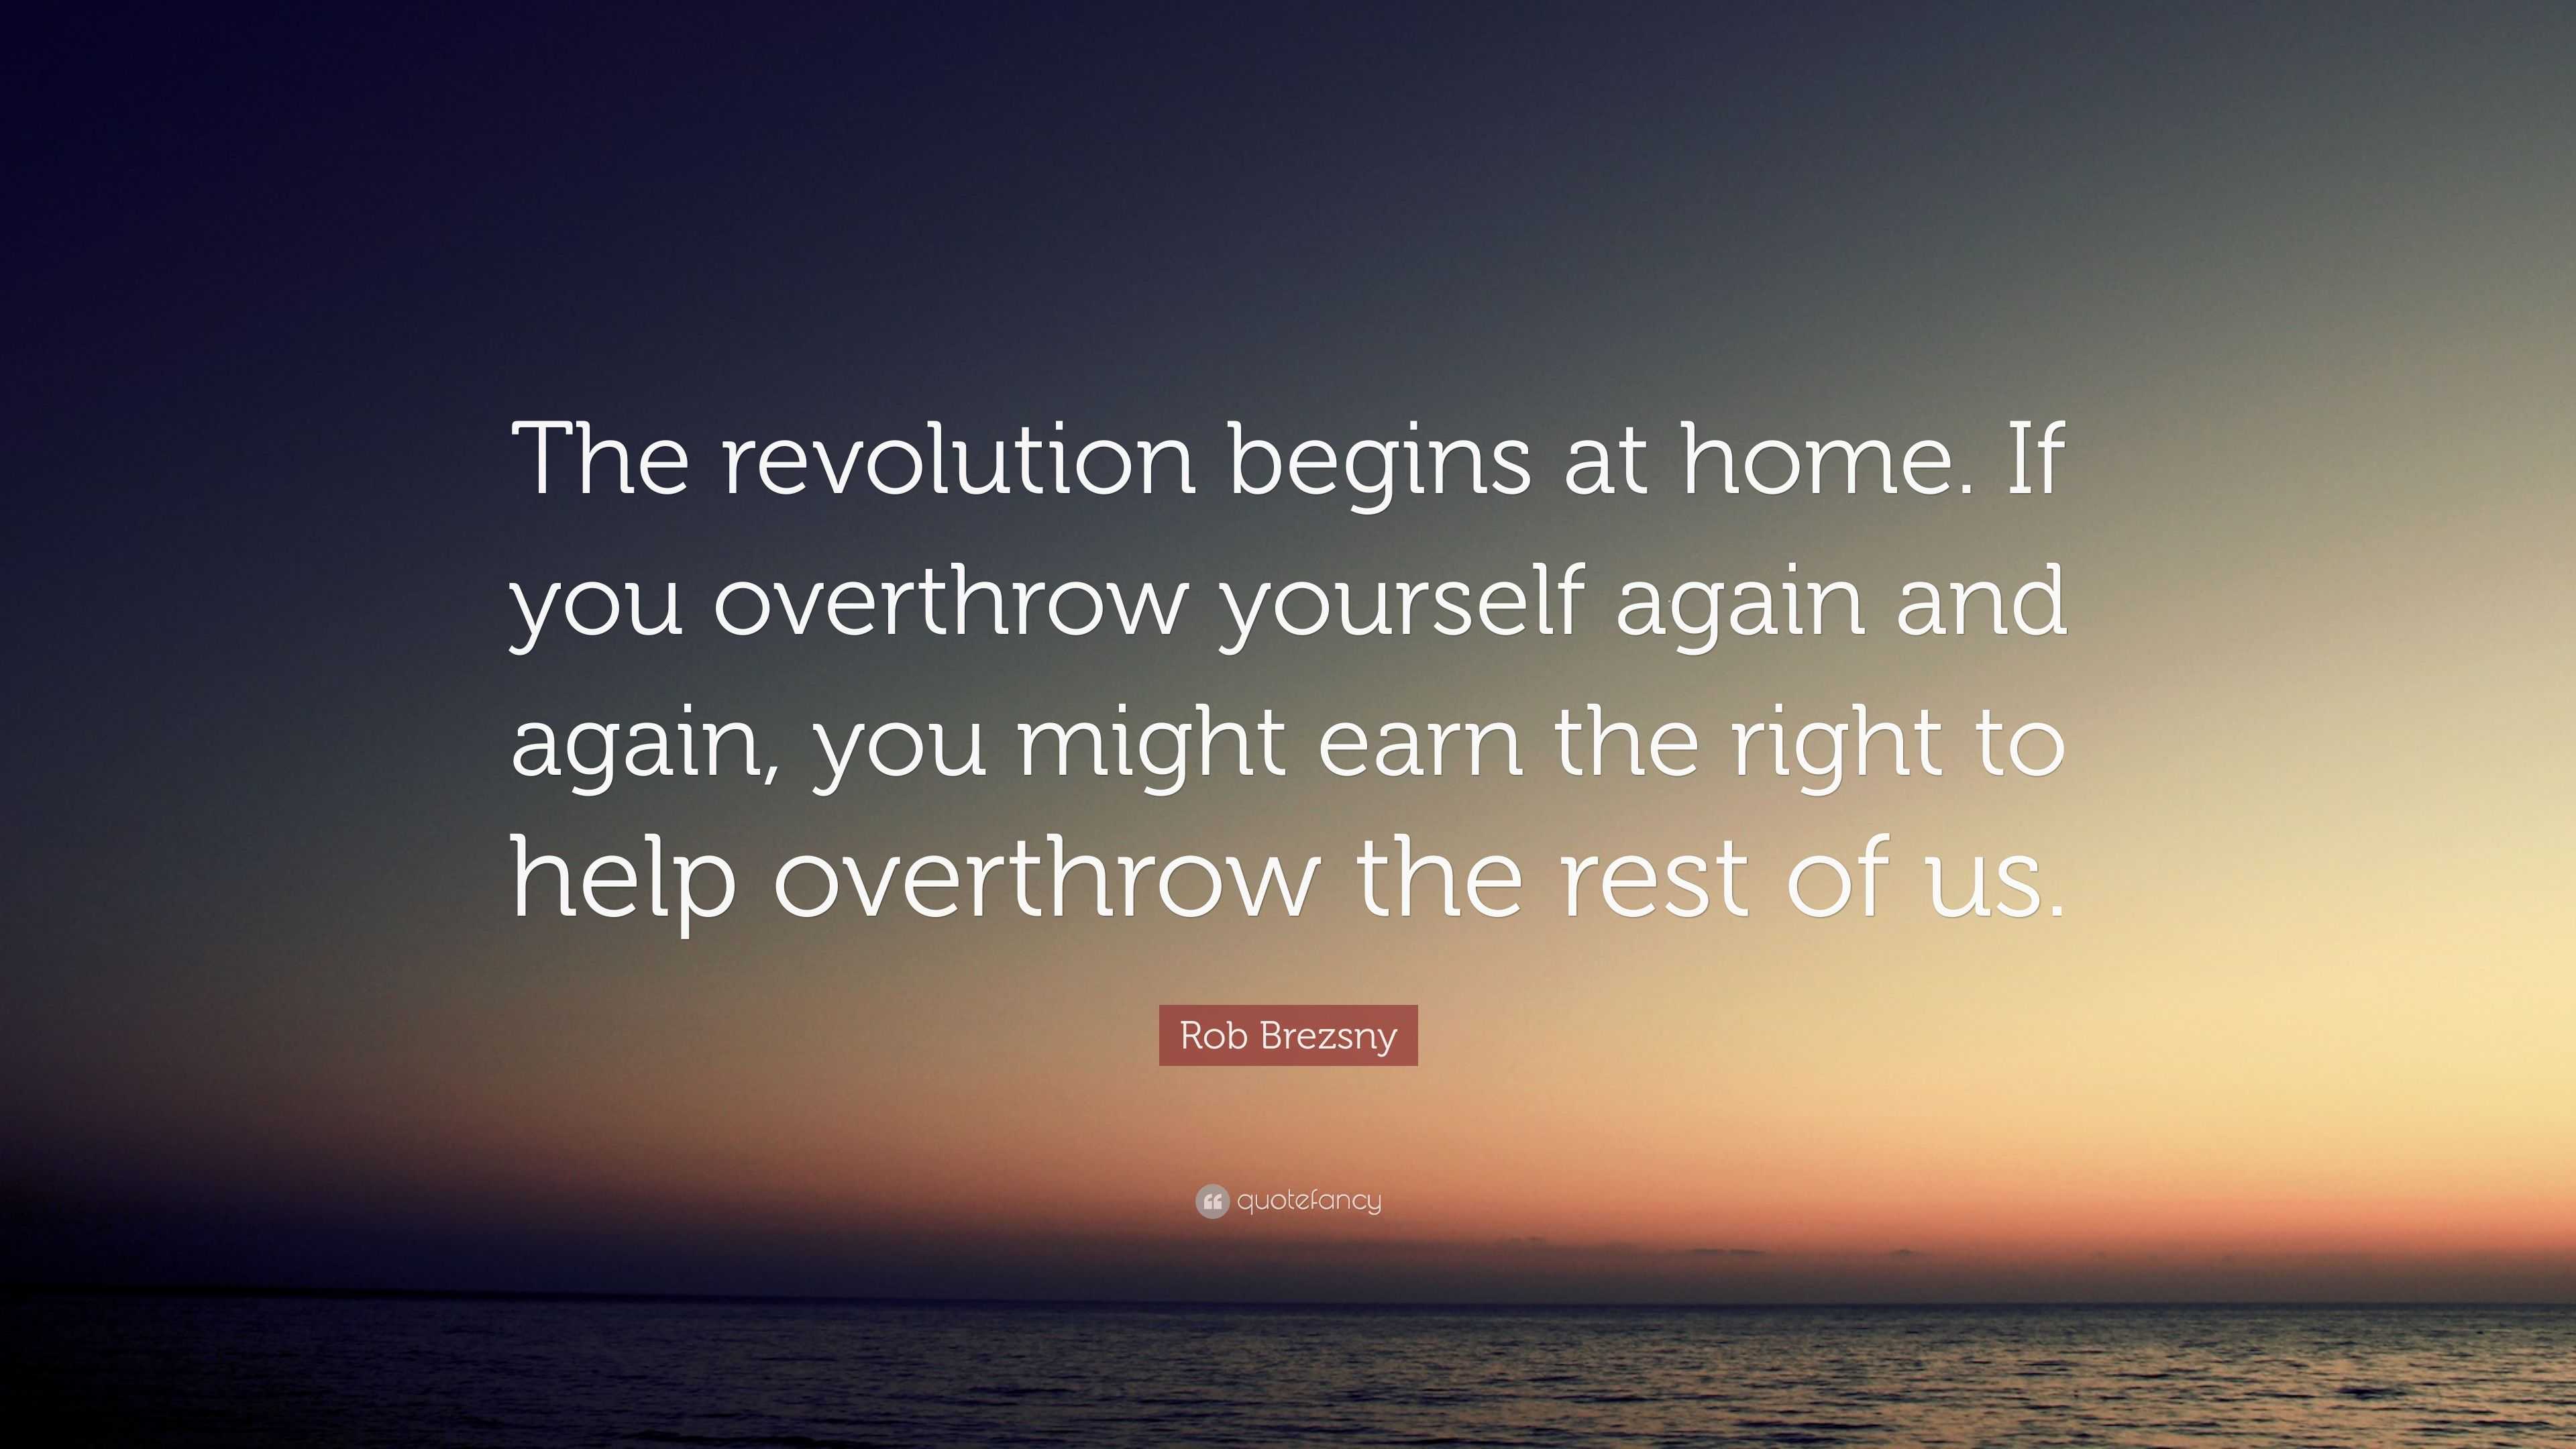 The Revolution Starts at Home